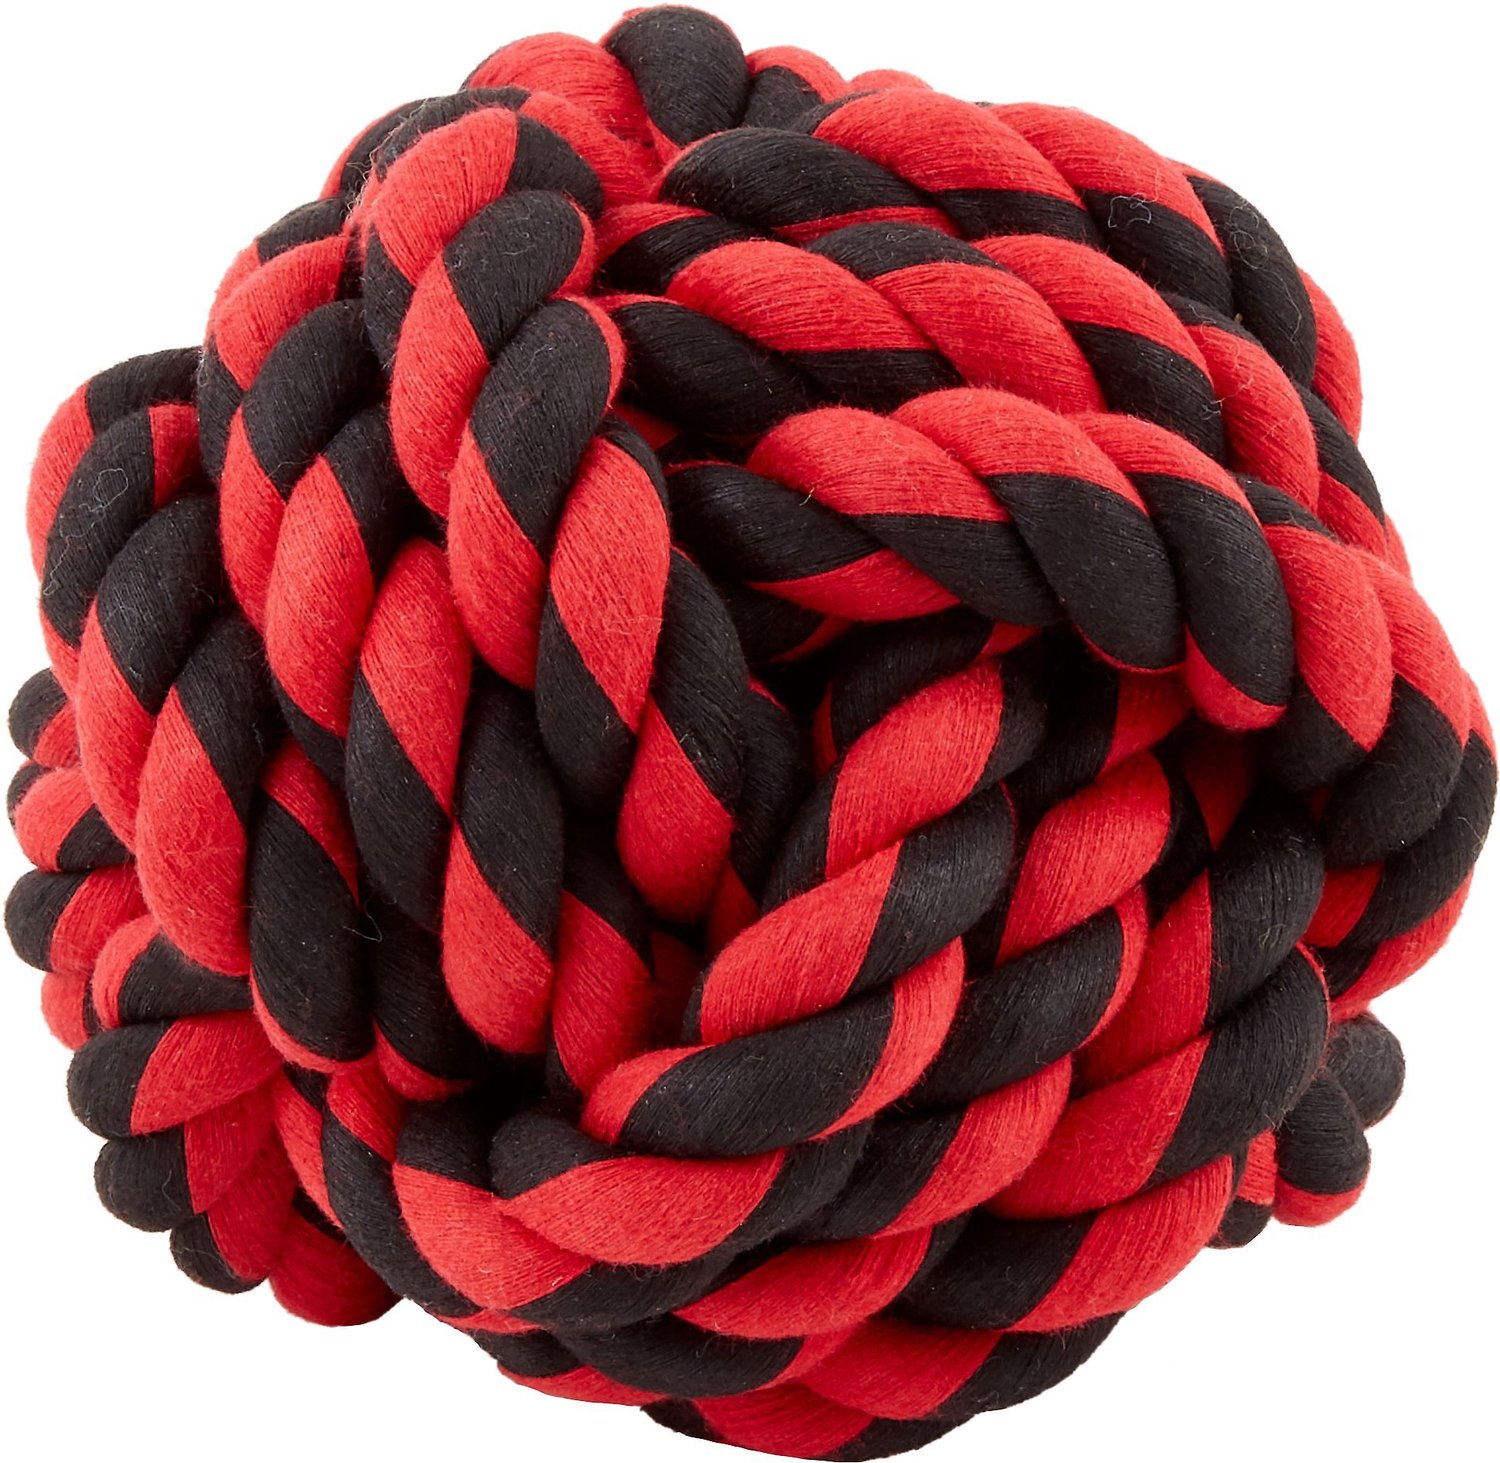 knot ball dog toy